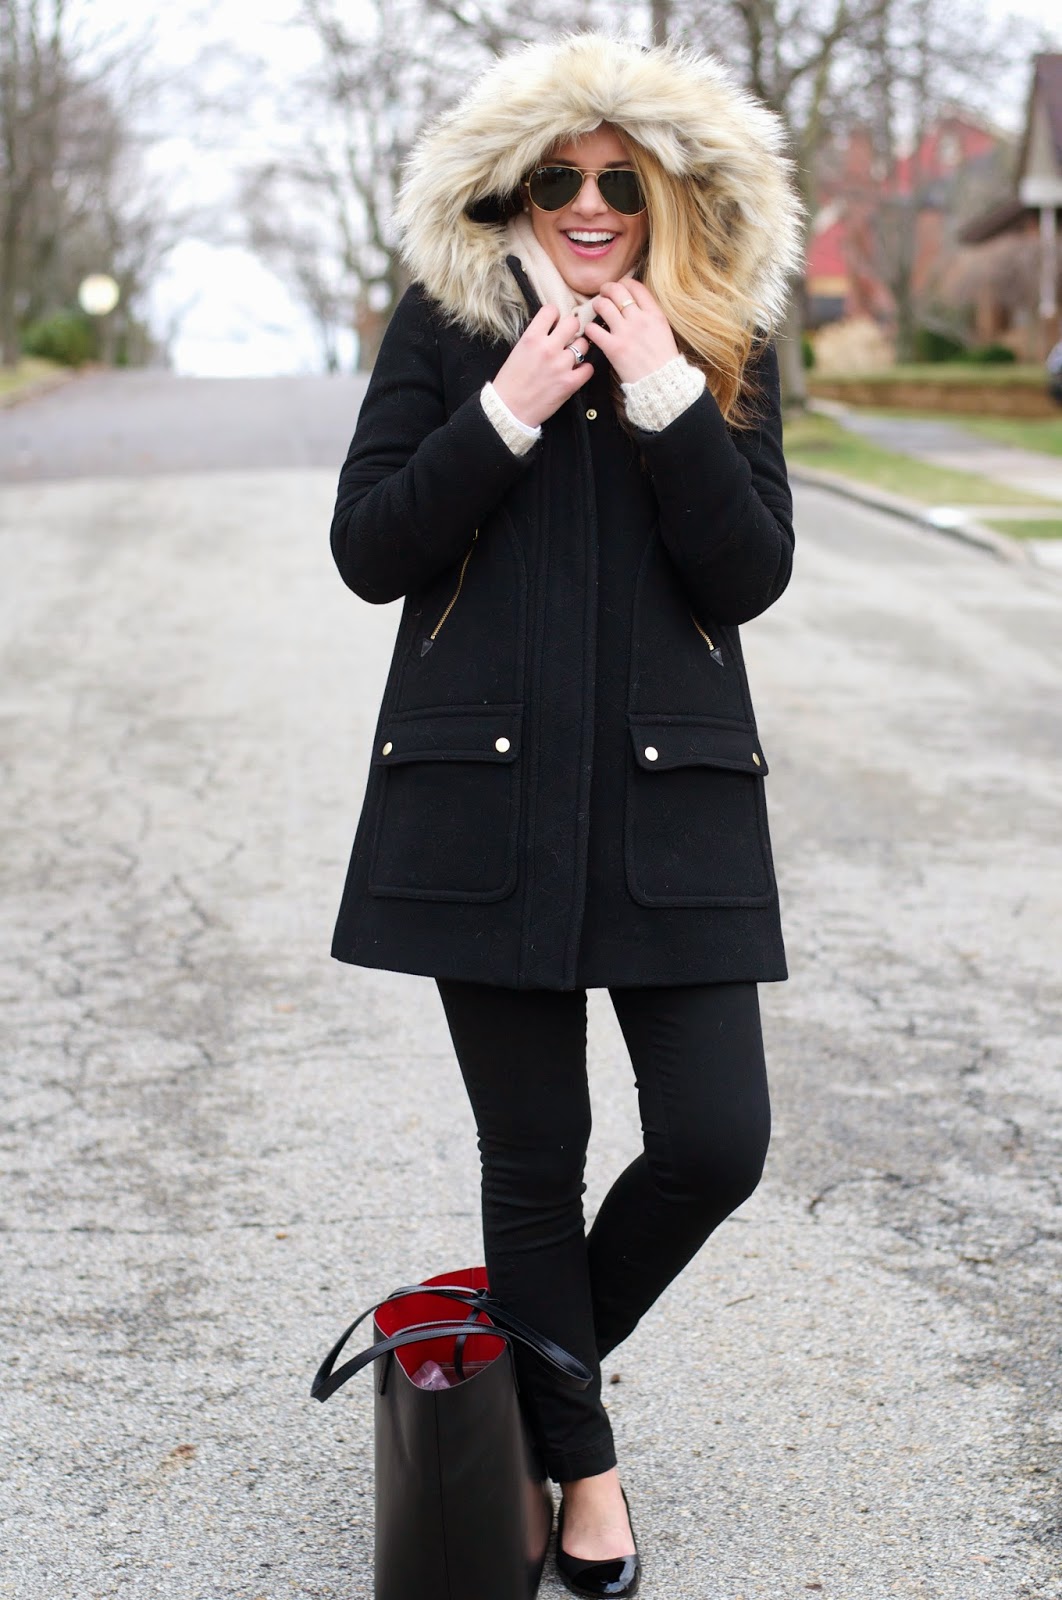 Summer Wind: Winter Layers ft. J. Crew Chateau Parka